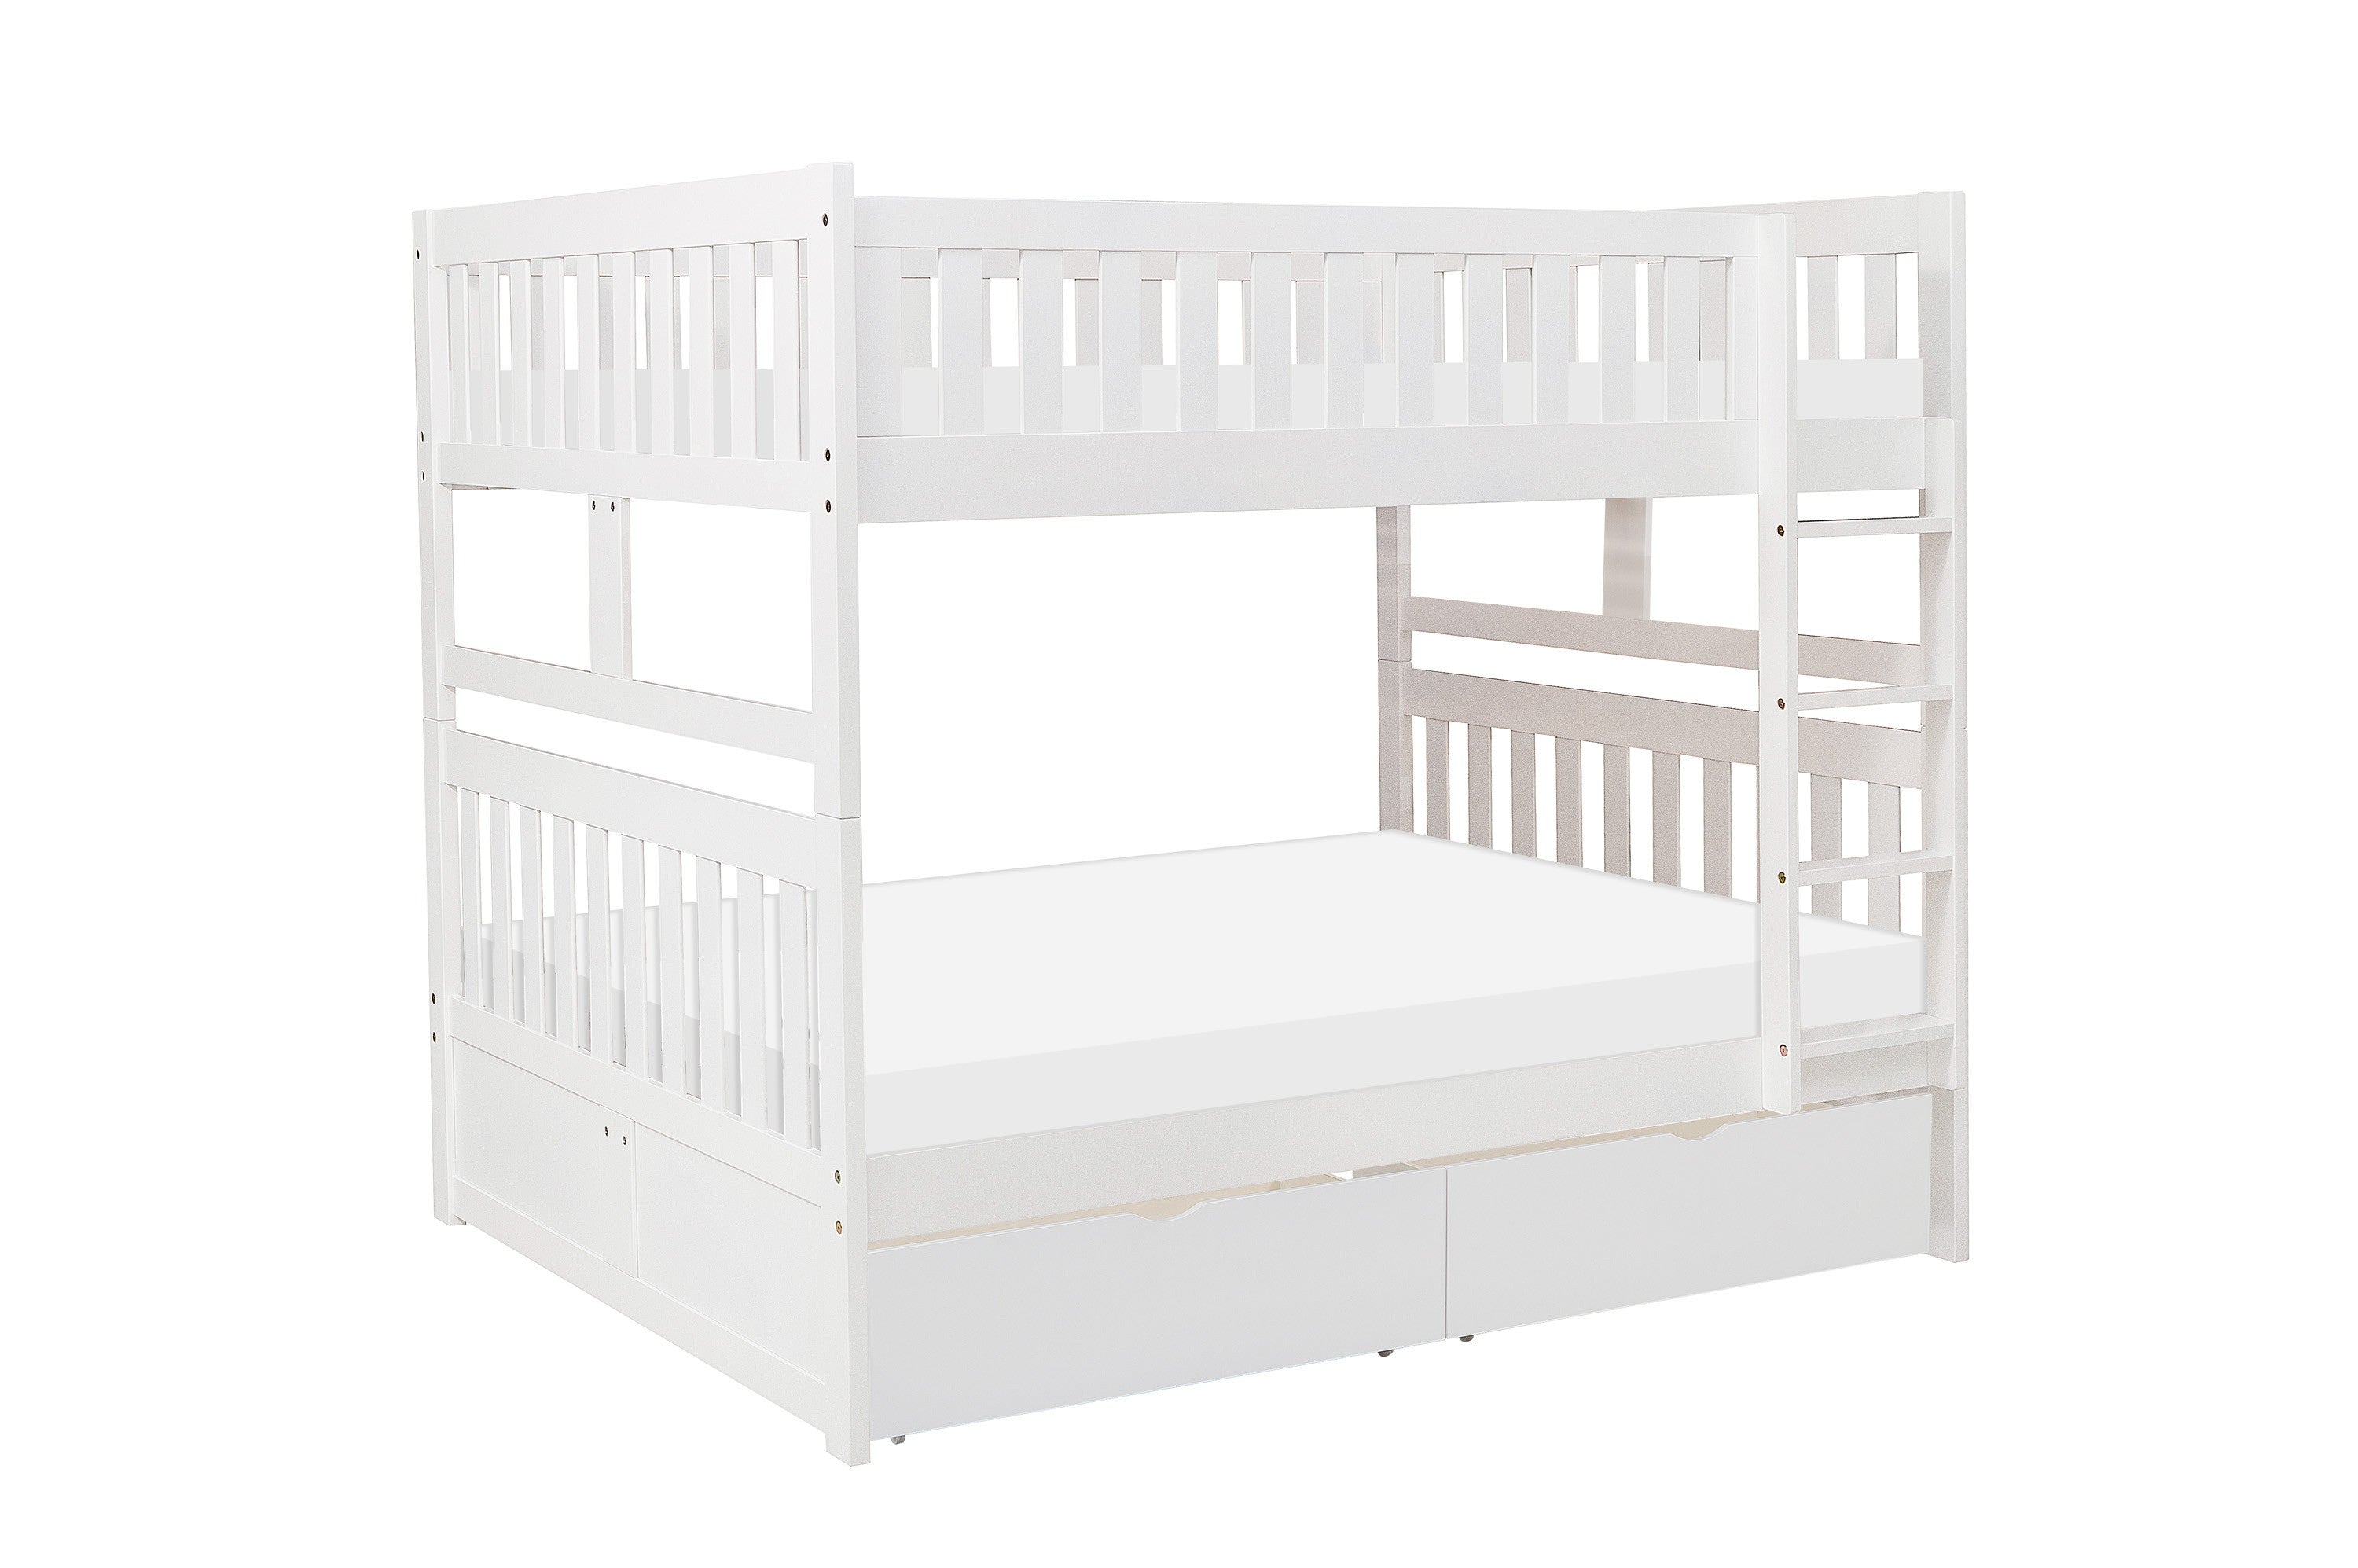 Galen White Full/Full Bunk Bed with Storage Boxes - SET | B2053FFW-1 | B2053FFW-2 | B2053FFW-SL | B2053W-T - Bien Home Furniture &amp; Electronics